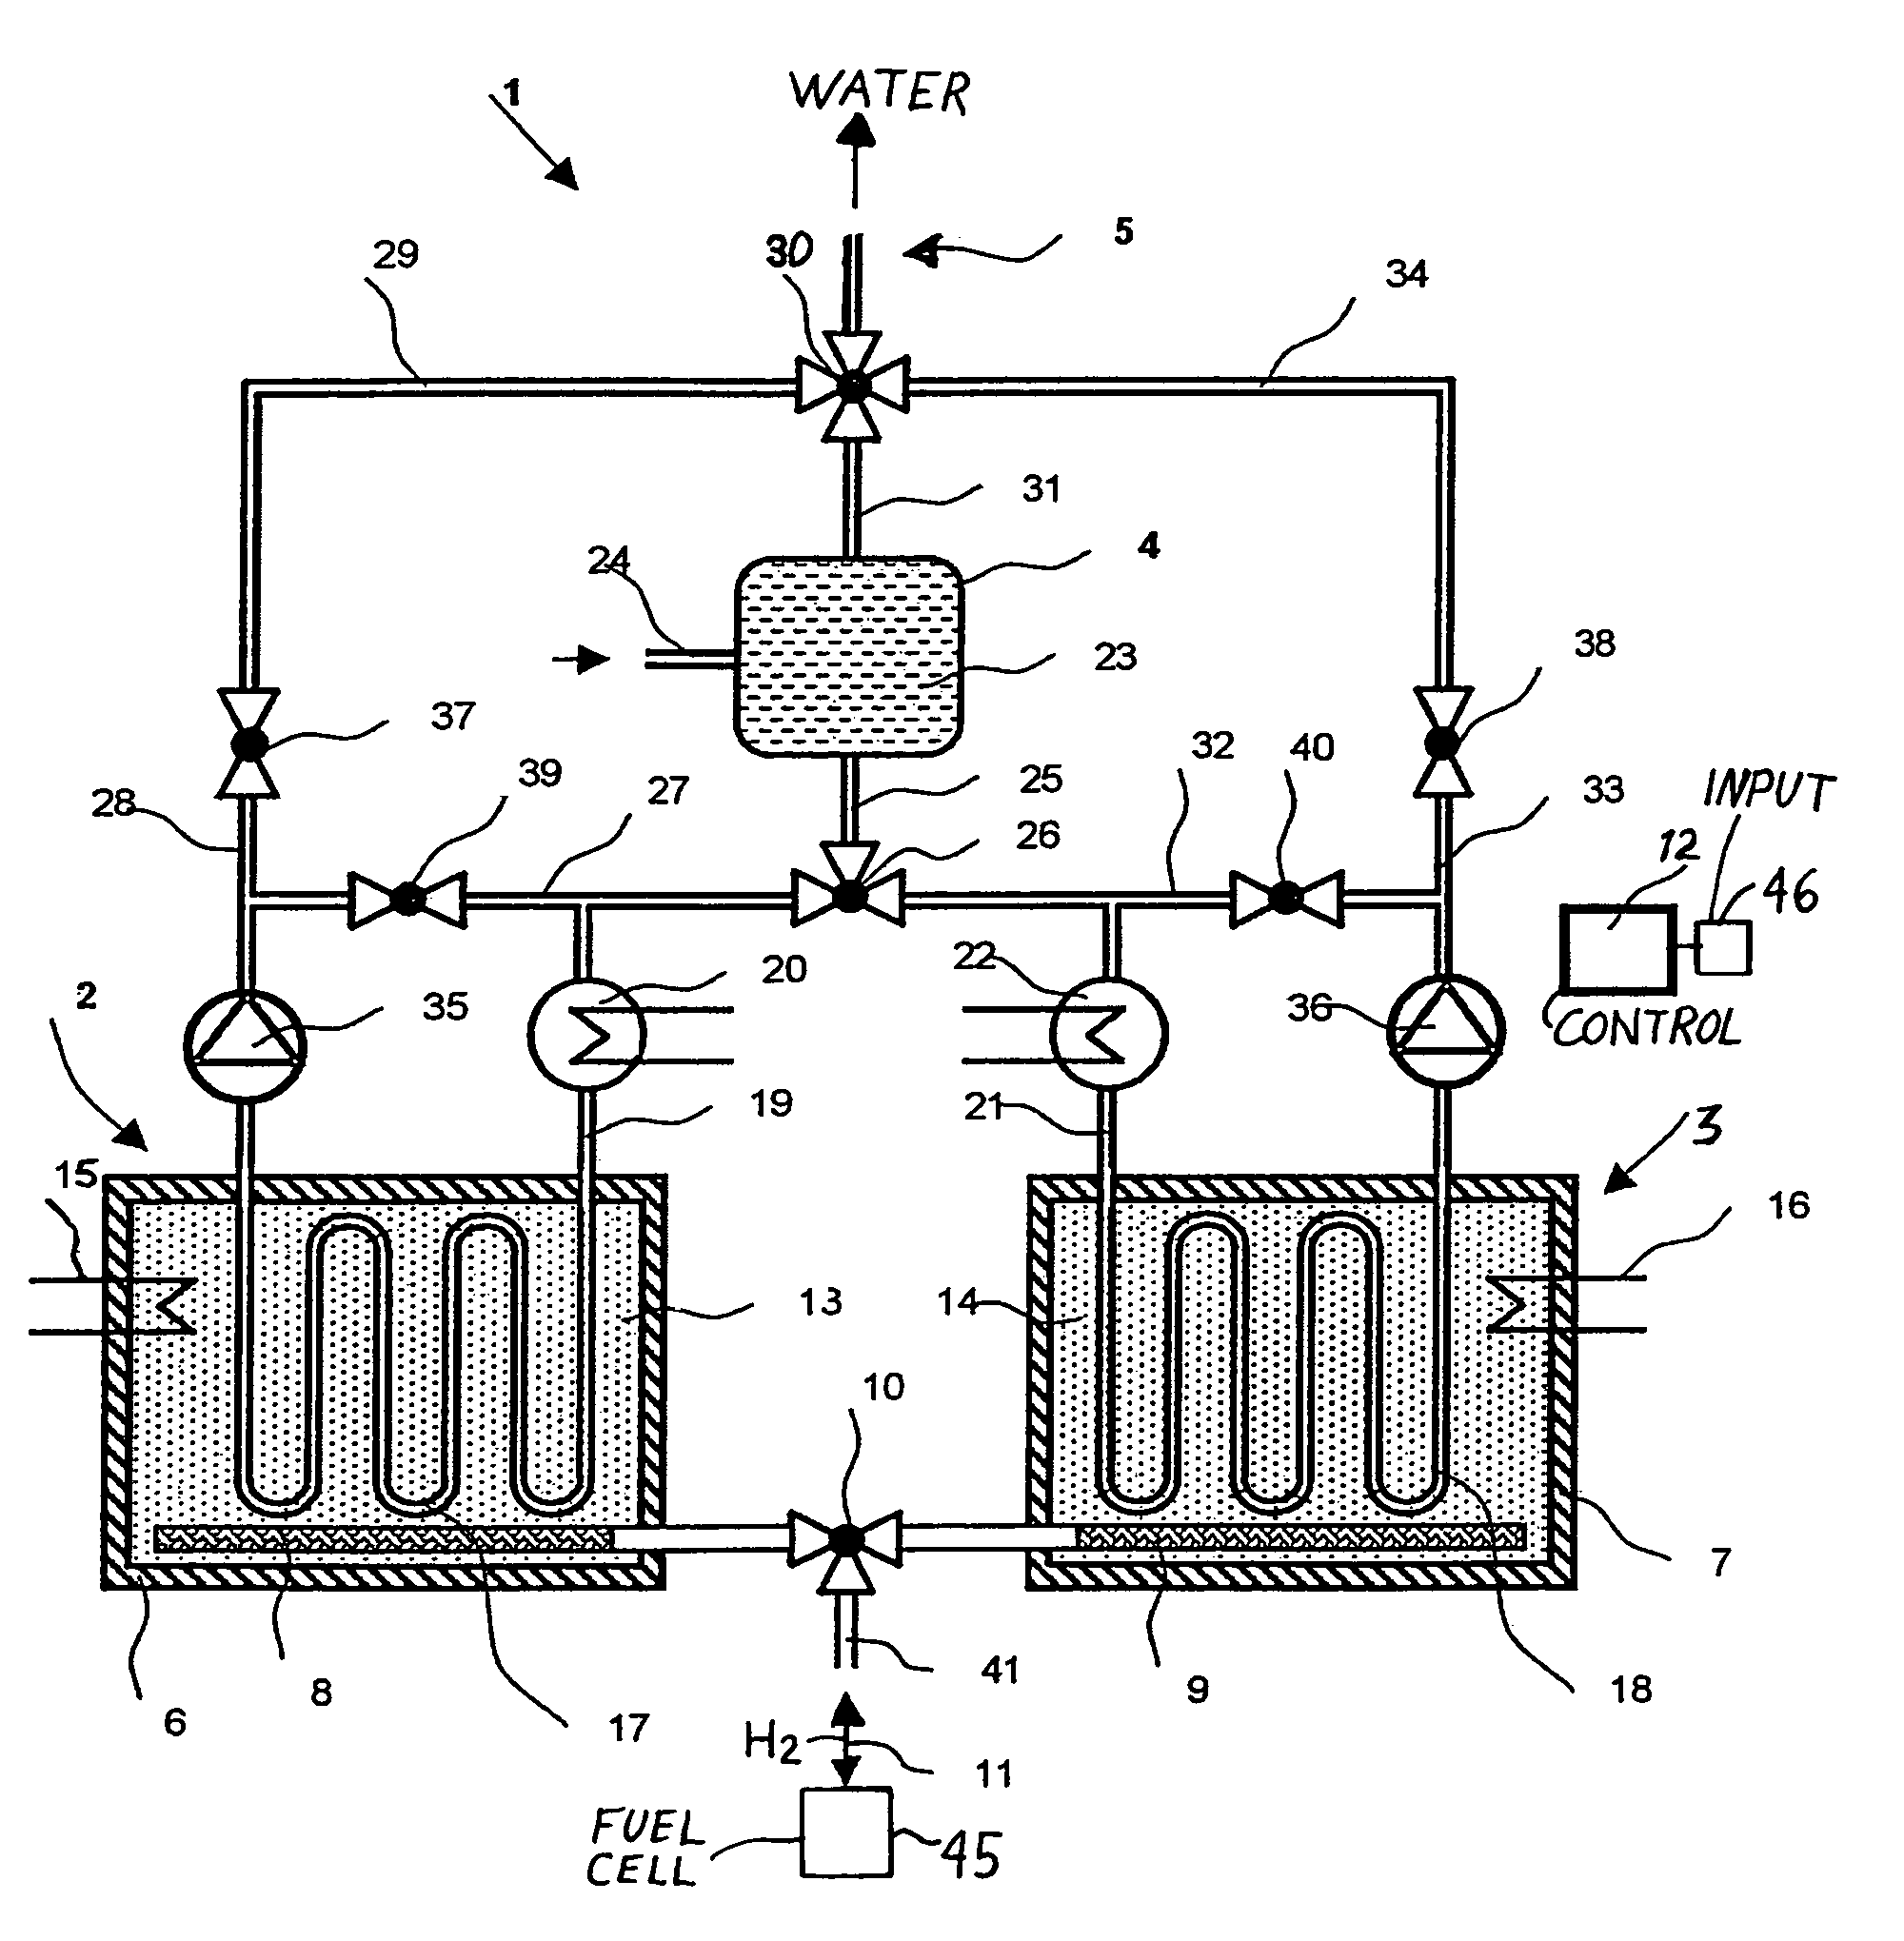 Method and apparatus for tempering gaseous and/or liquid media in transportation vehicles, particularly in aircraft